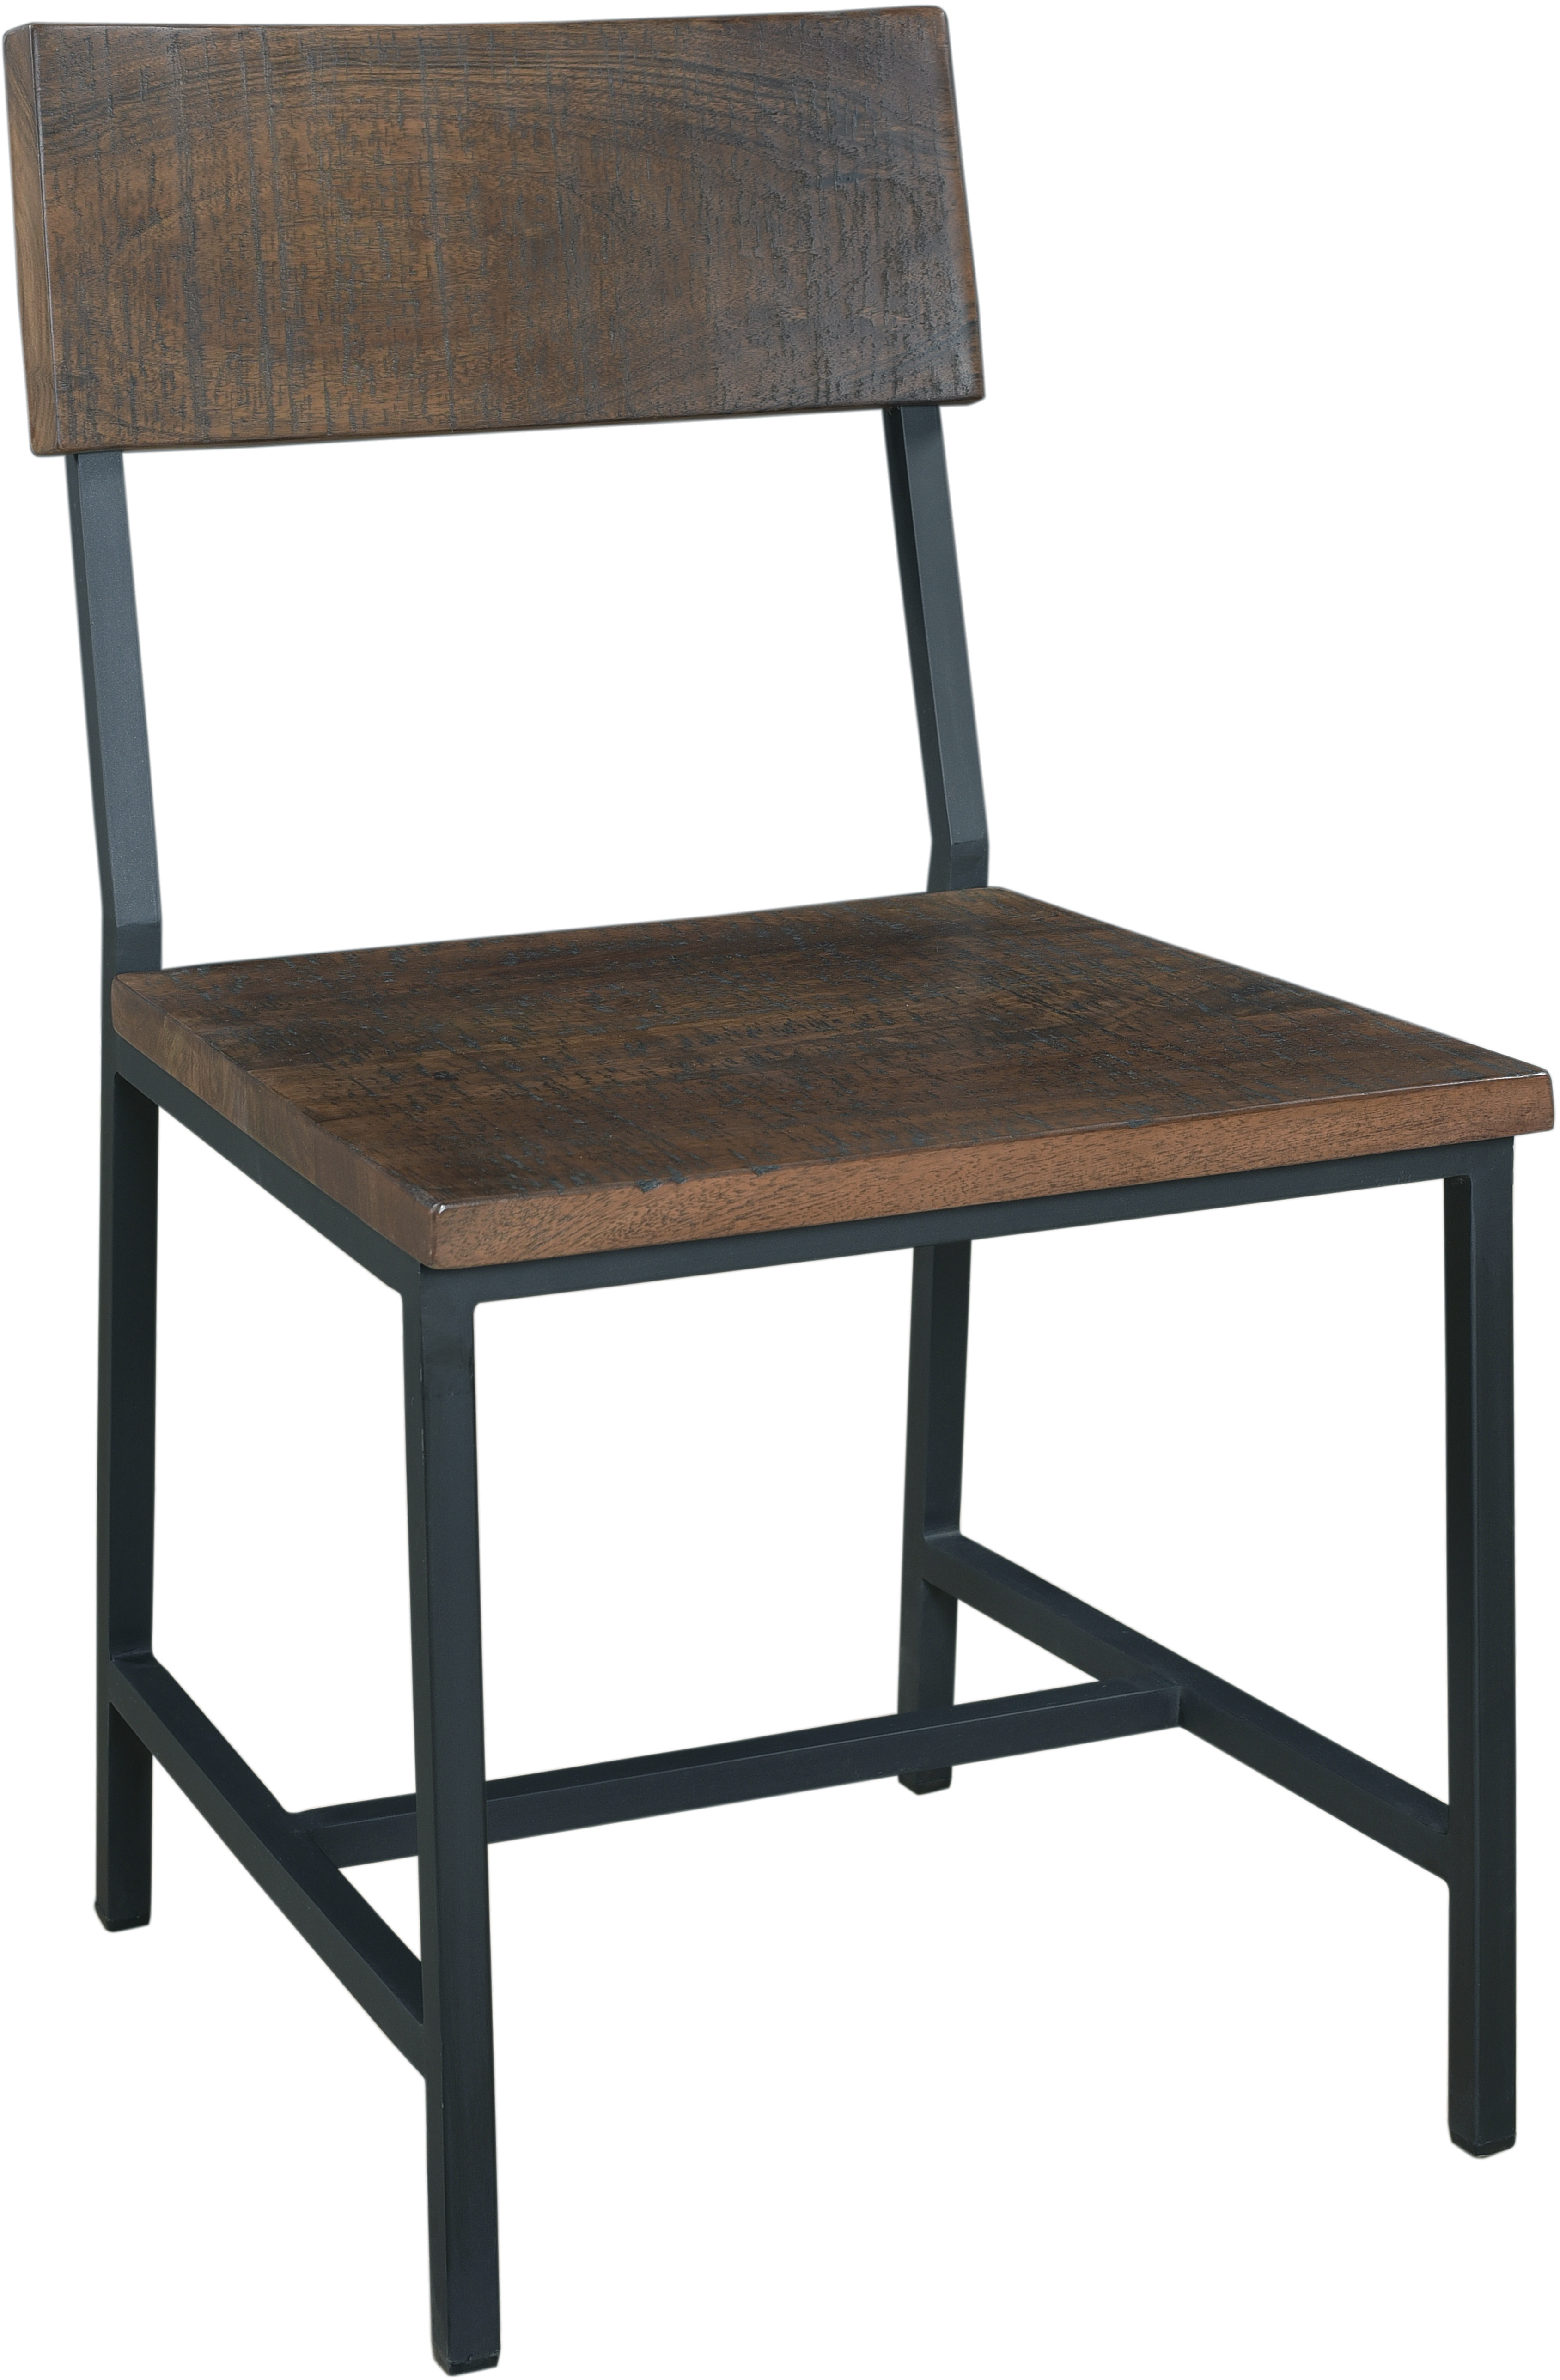 Coast to Coast Imports™ Dining Chair